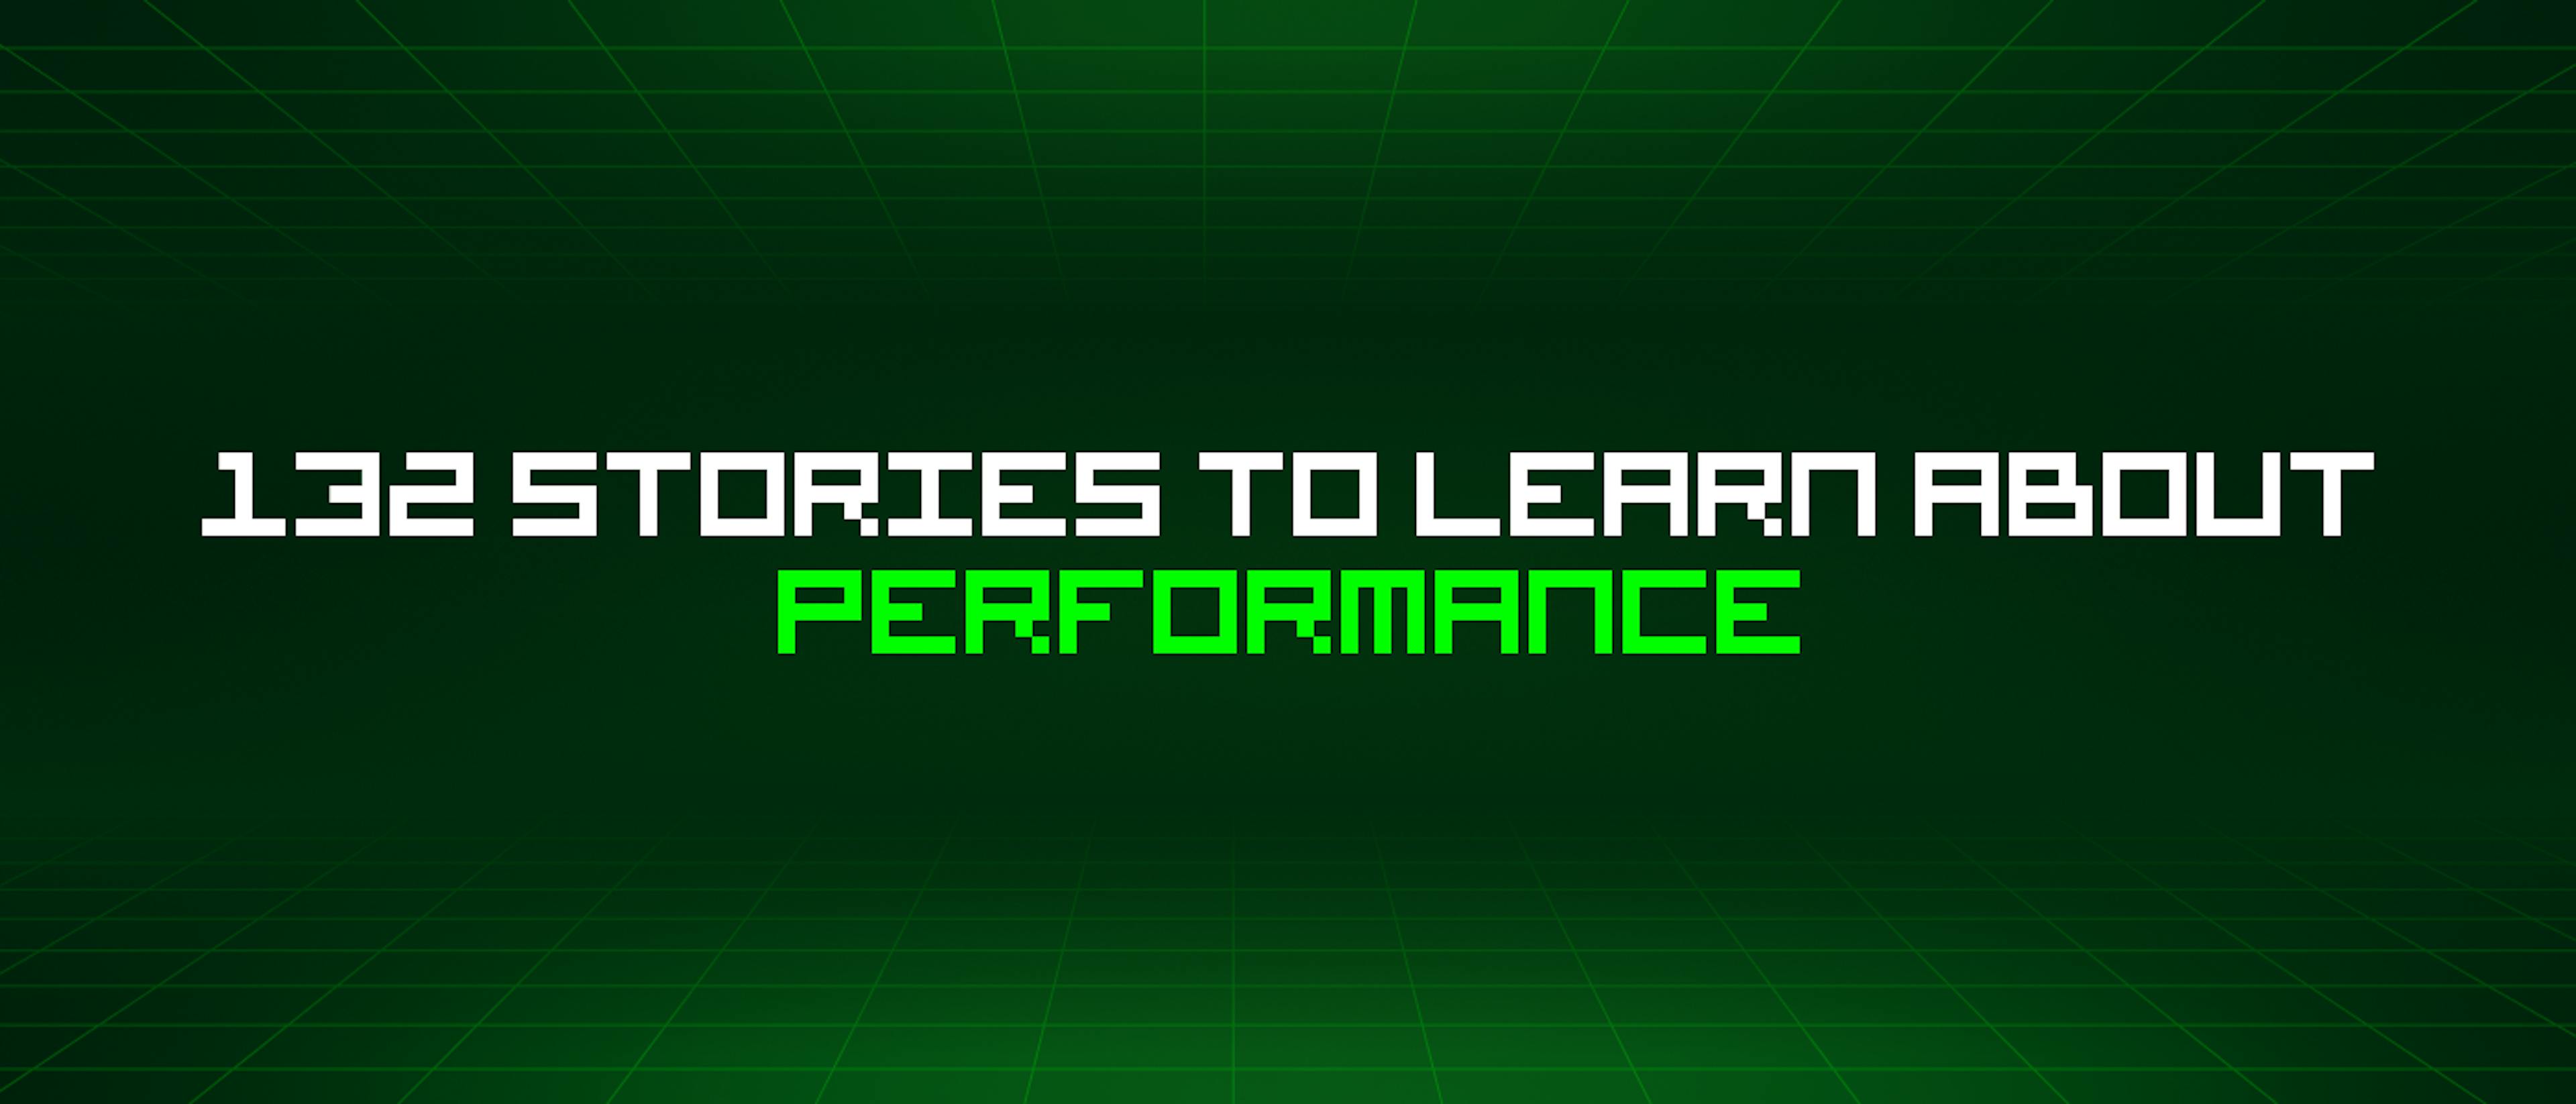 featured image - 132 Stories To Learn About Performance